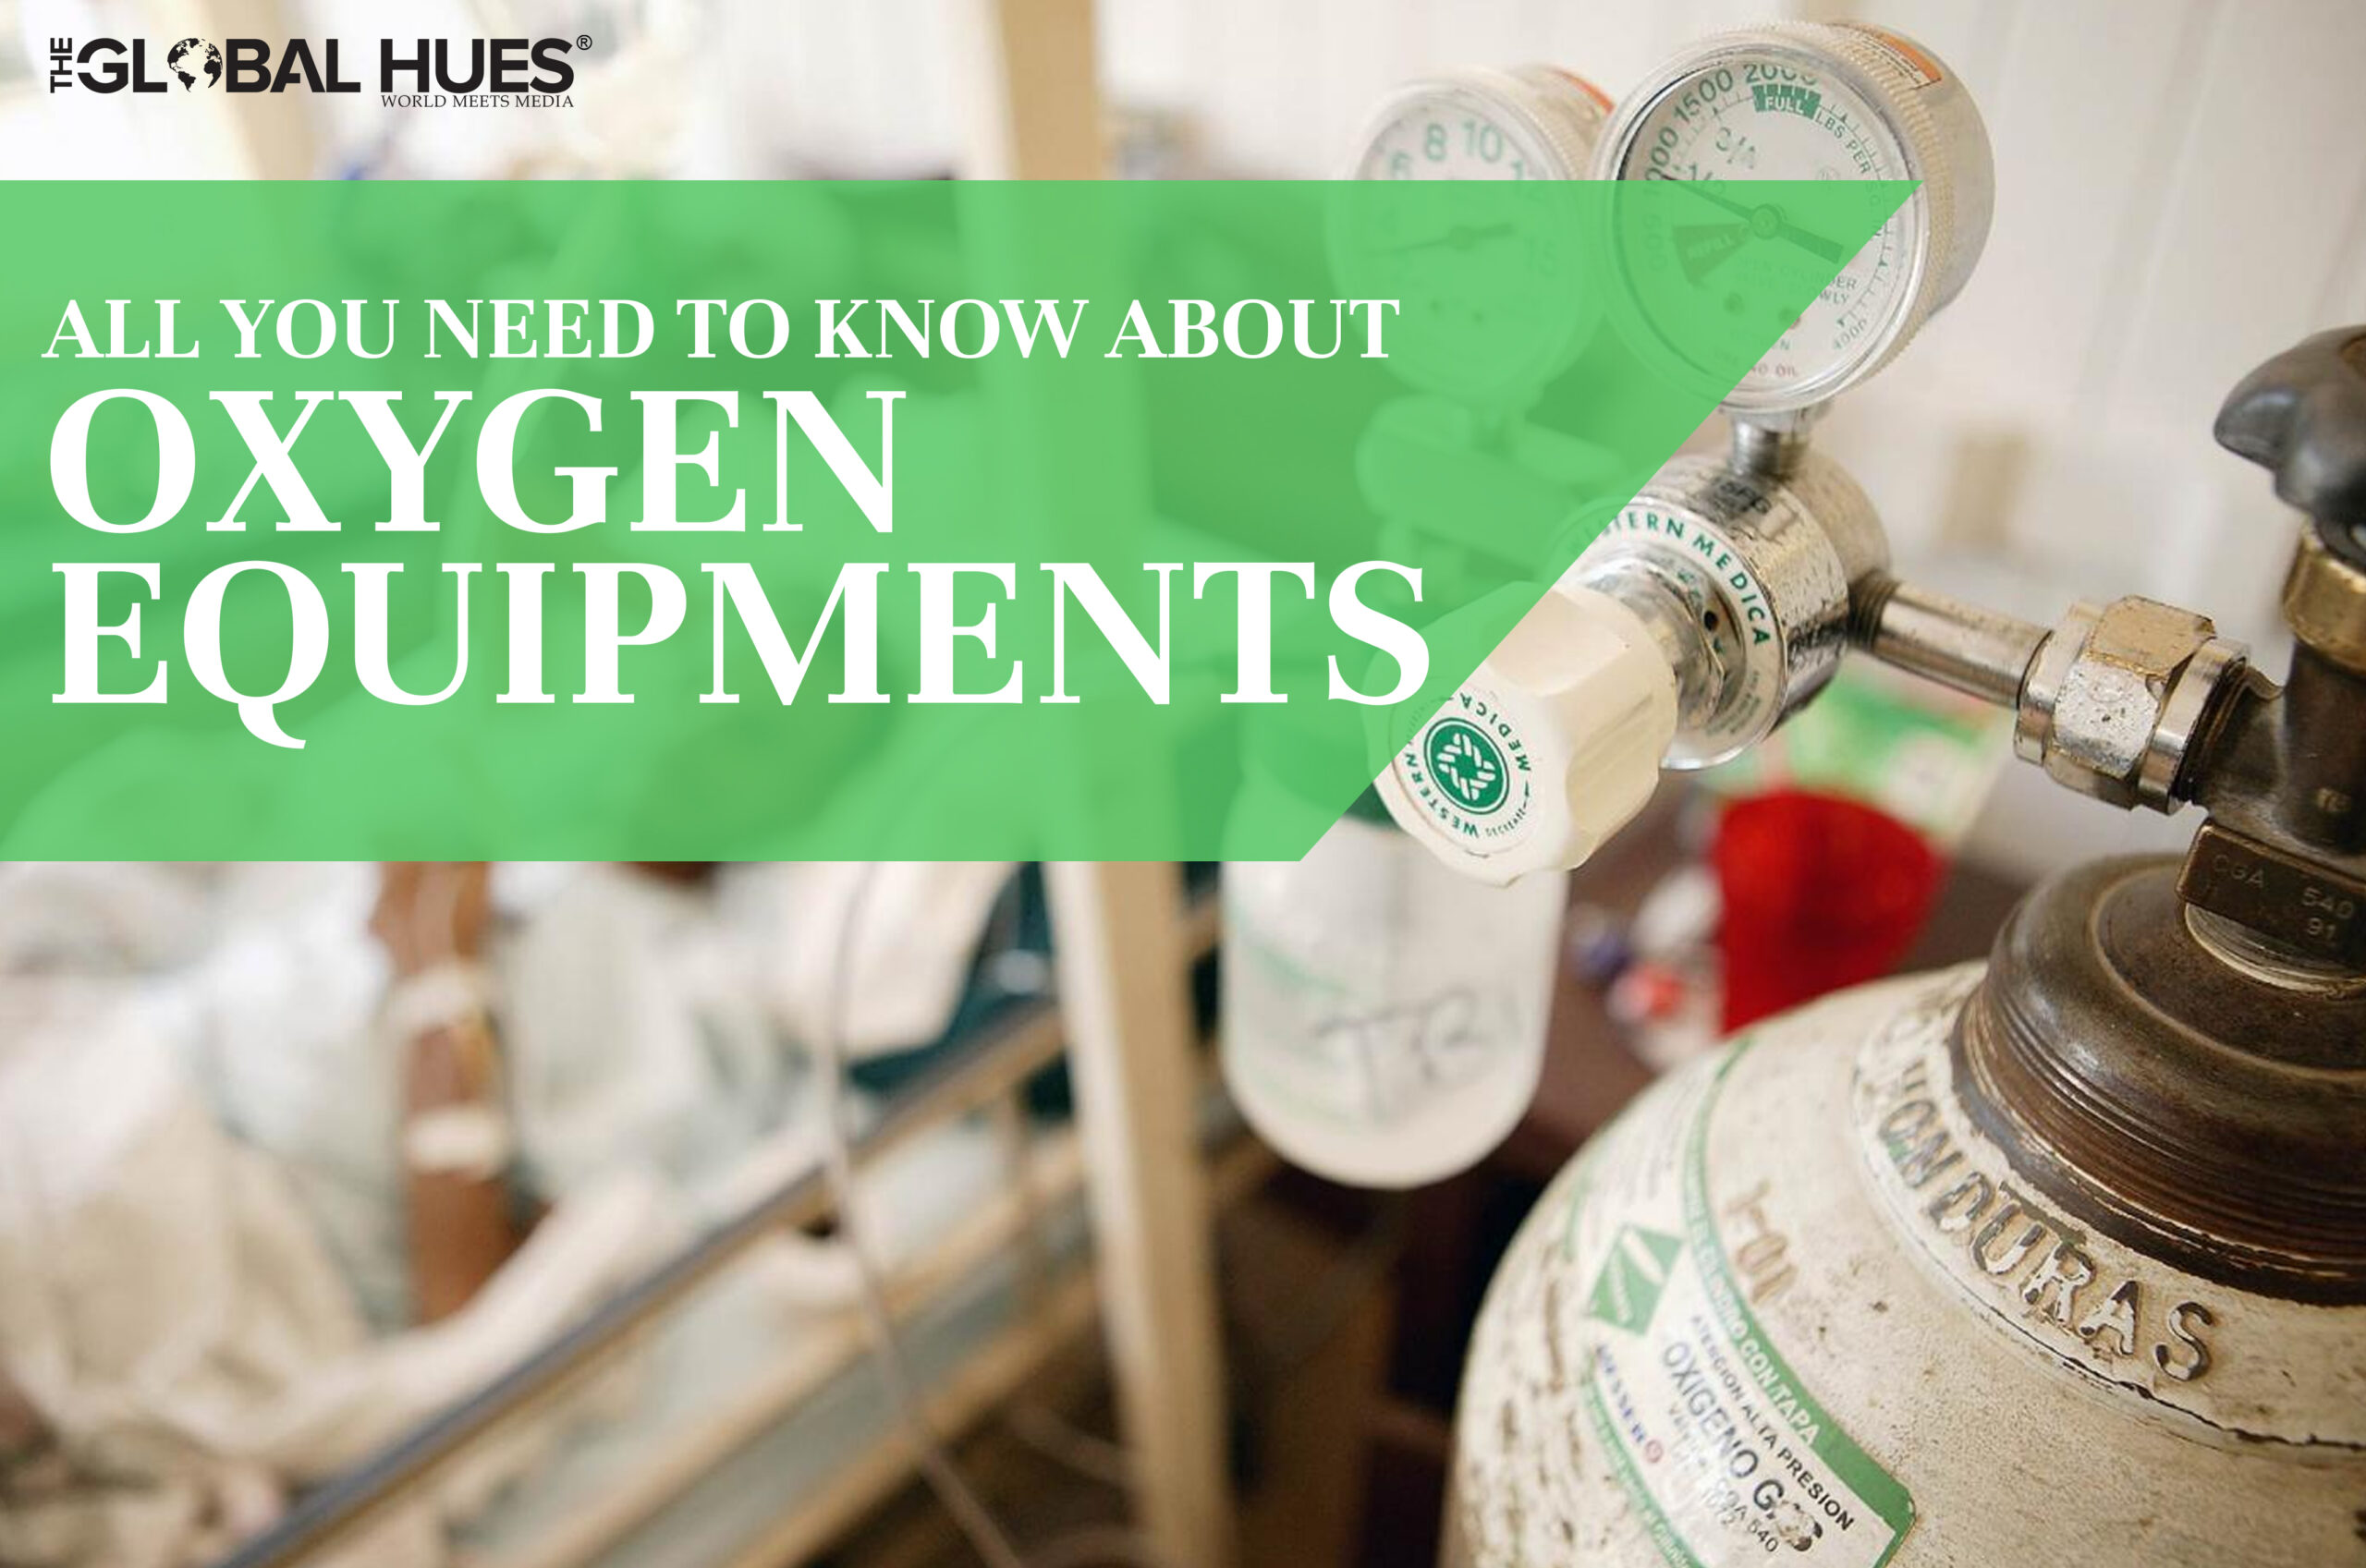 All-you-need-to-know-about-Oxygen-Equipments